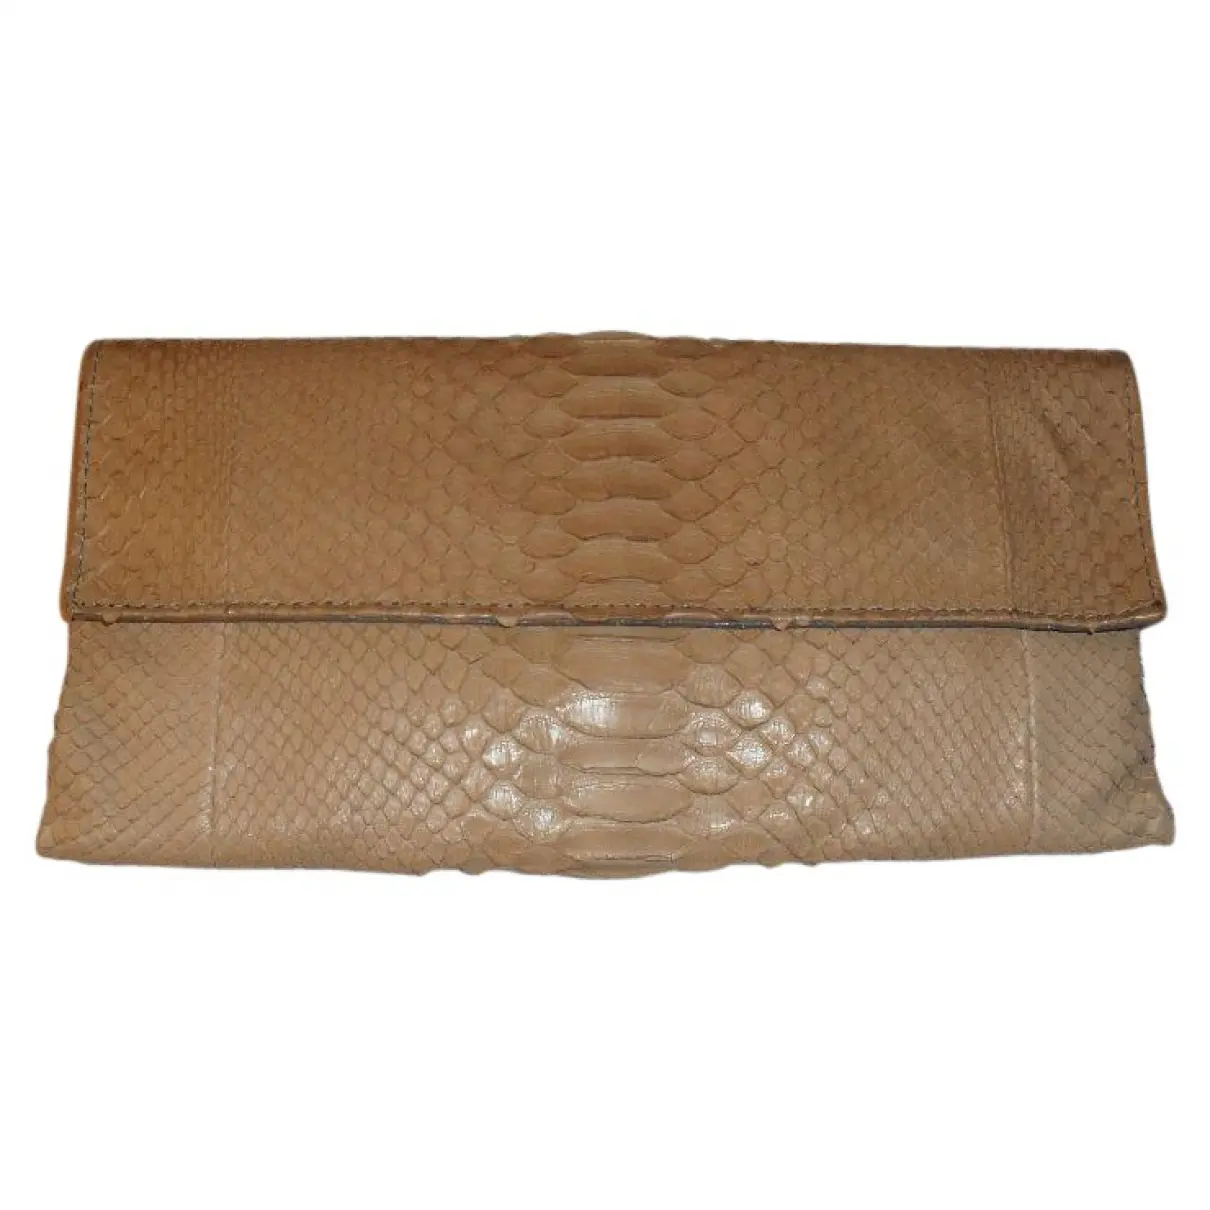 Leather clutch bag Abaco